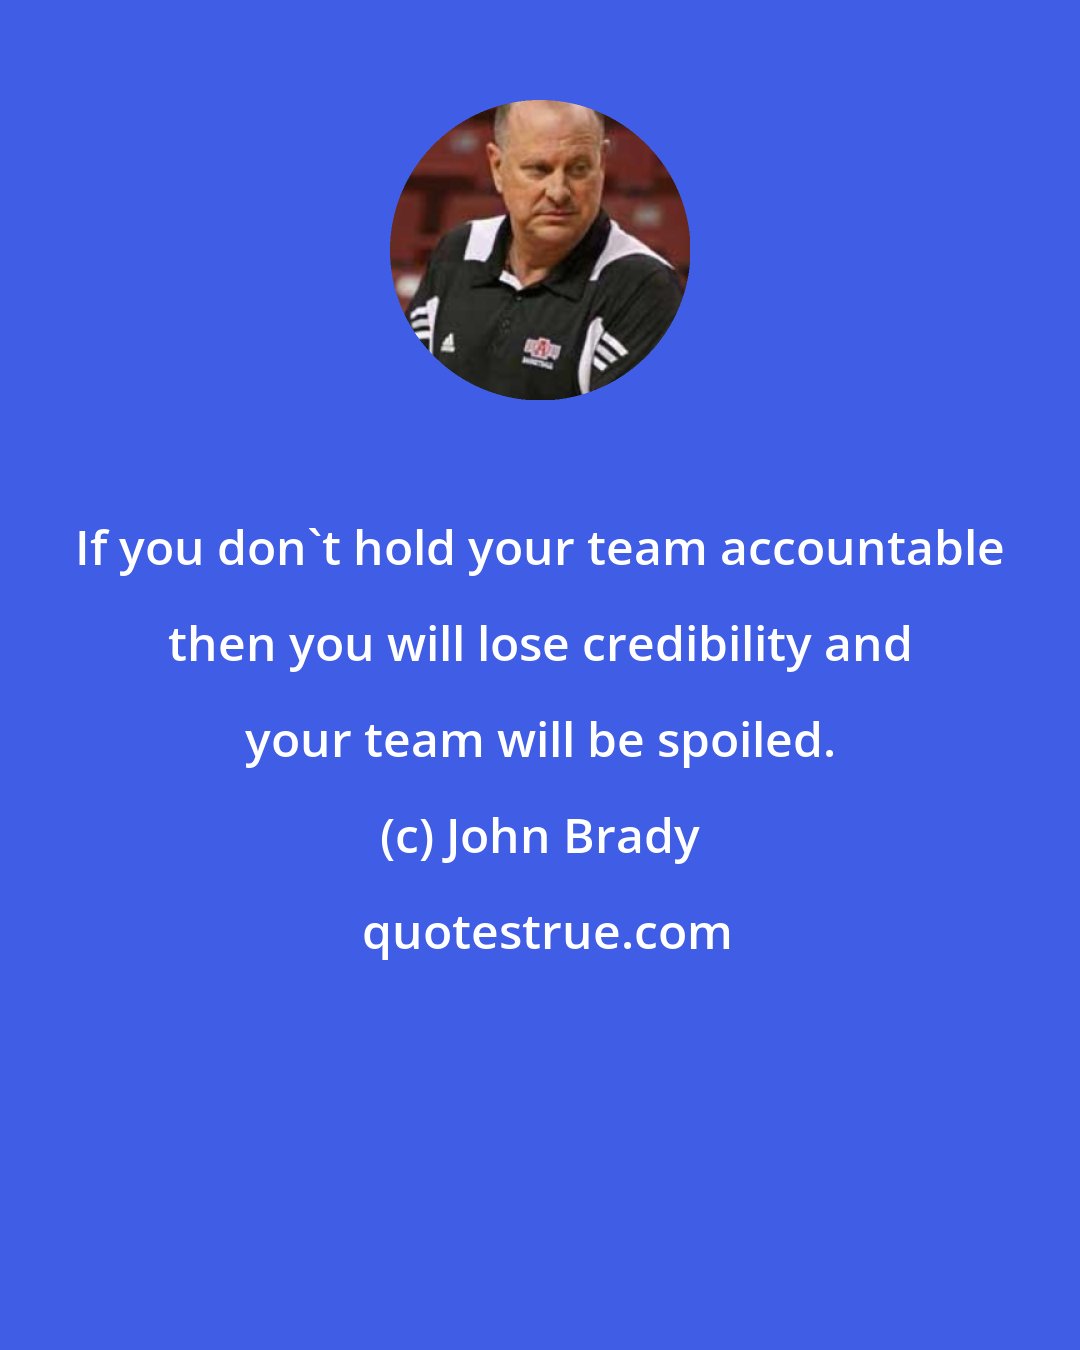 John Brady: If you don't hold your team accountable then you will lose credibility and your team will be spoiled.